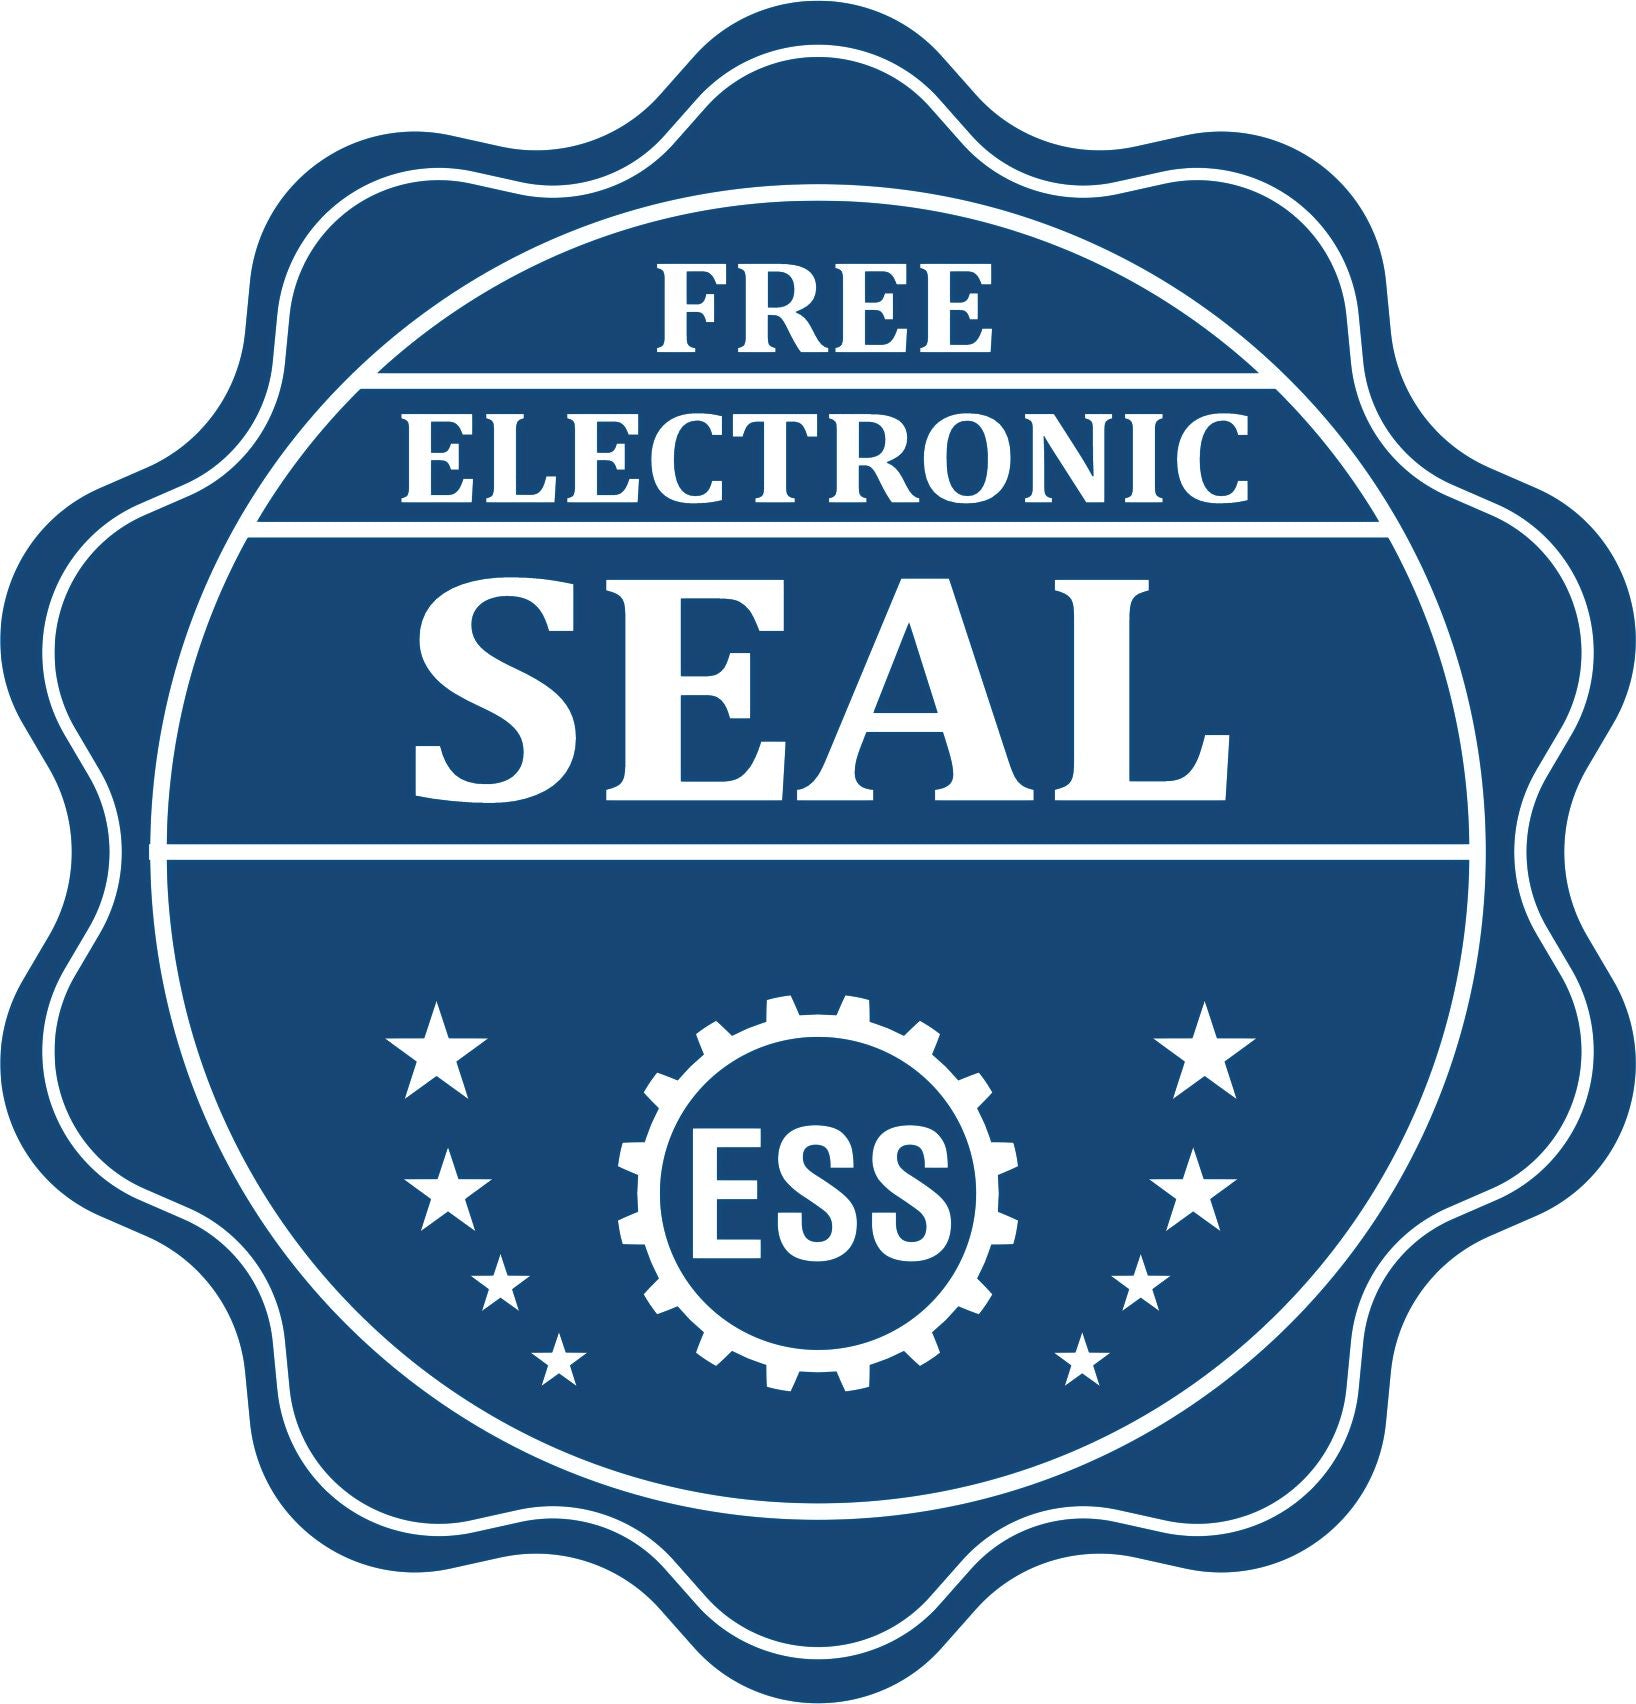 A badge showing a free electronic seal for the Gift District of Columbia Architect Seal with stars and the ESS gear on the emblem.